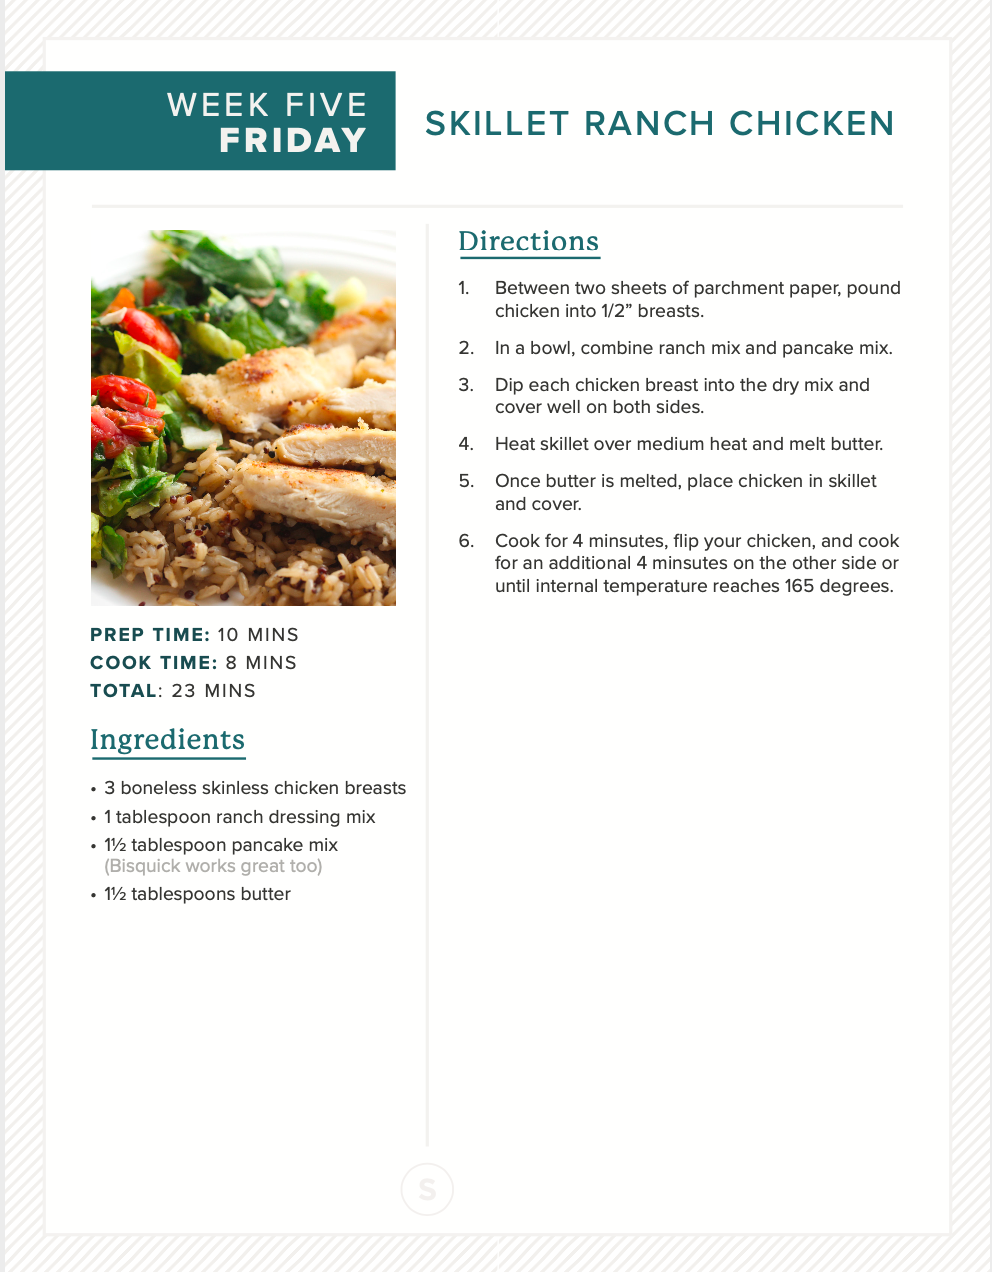 Meals for Two - 12 Week Plan